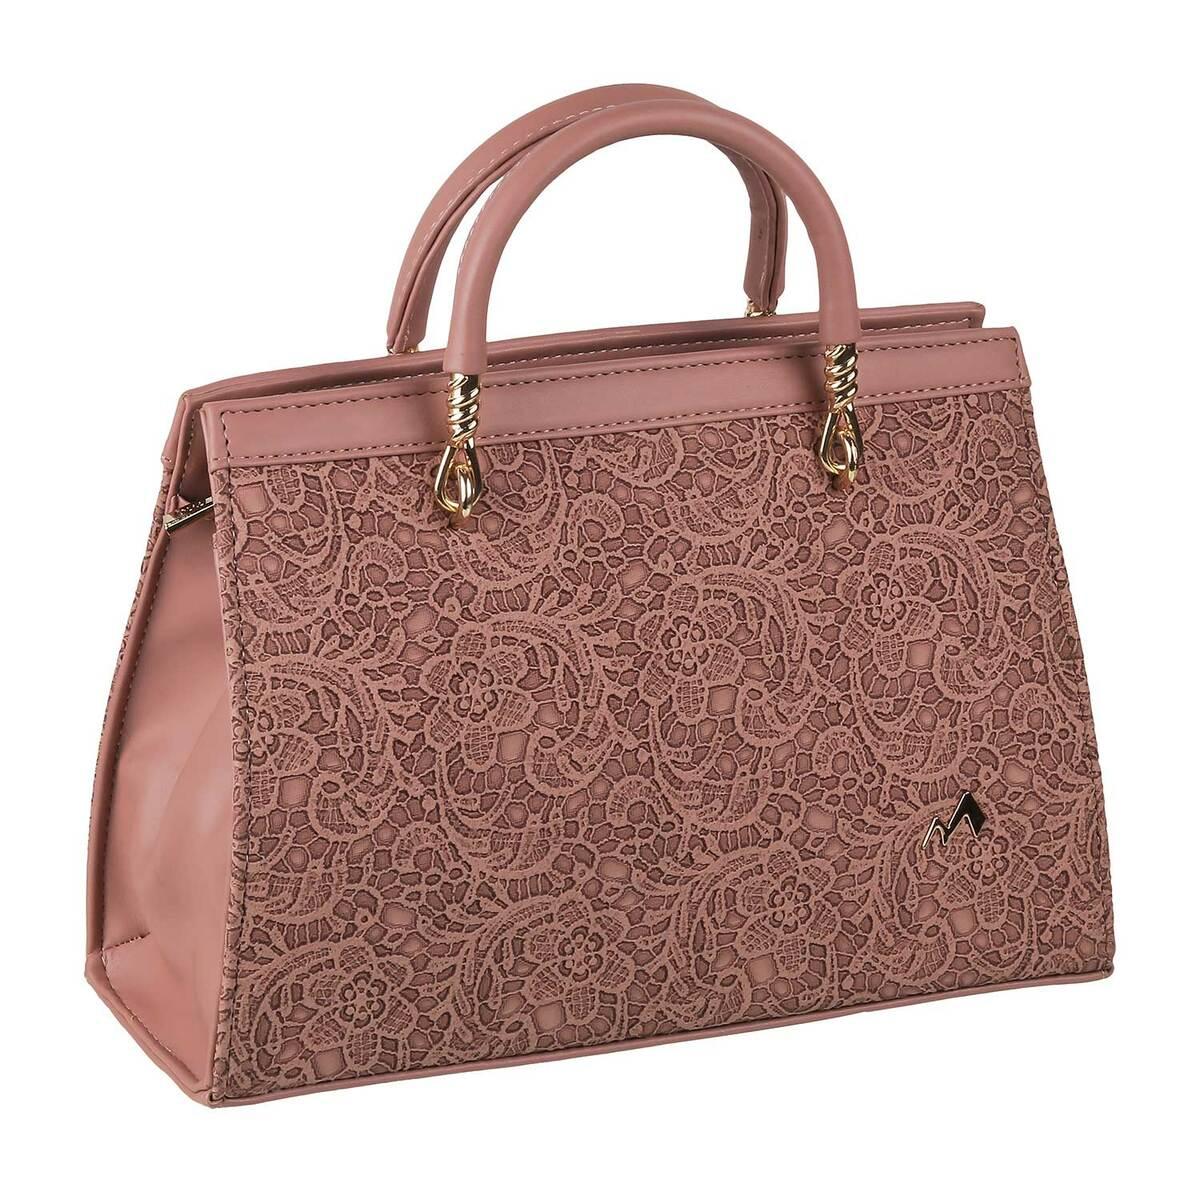 Buy Oriflame The Style Collection Tote Bag at Amazon.in